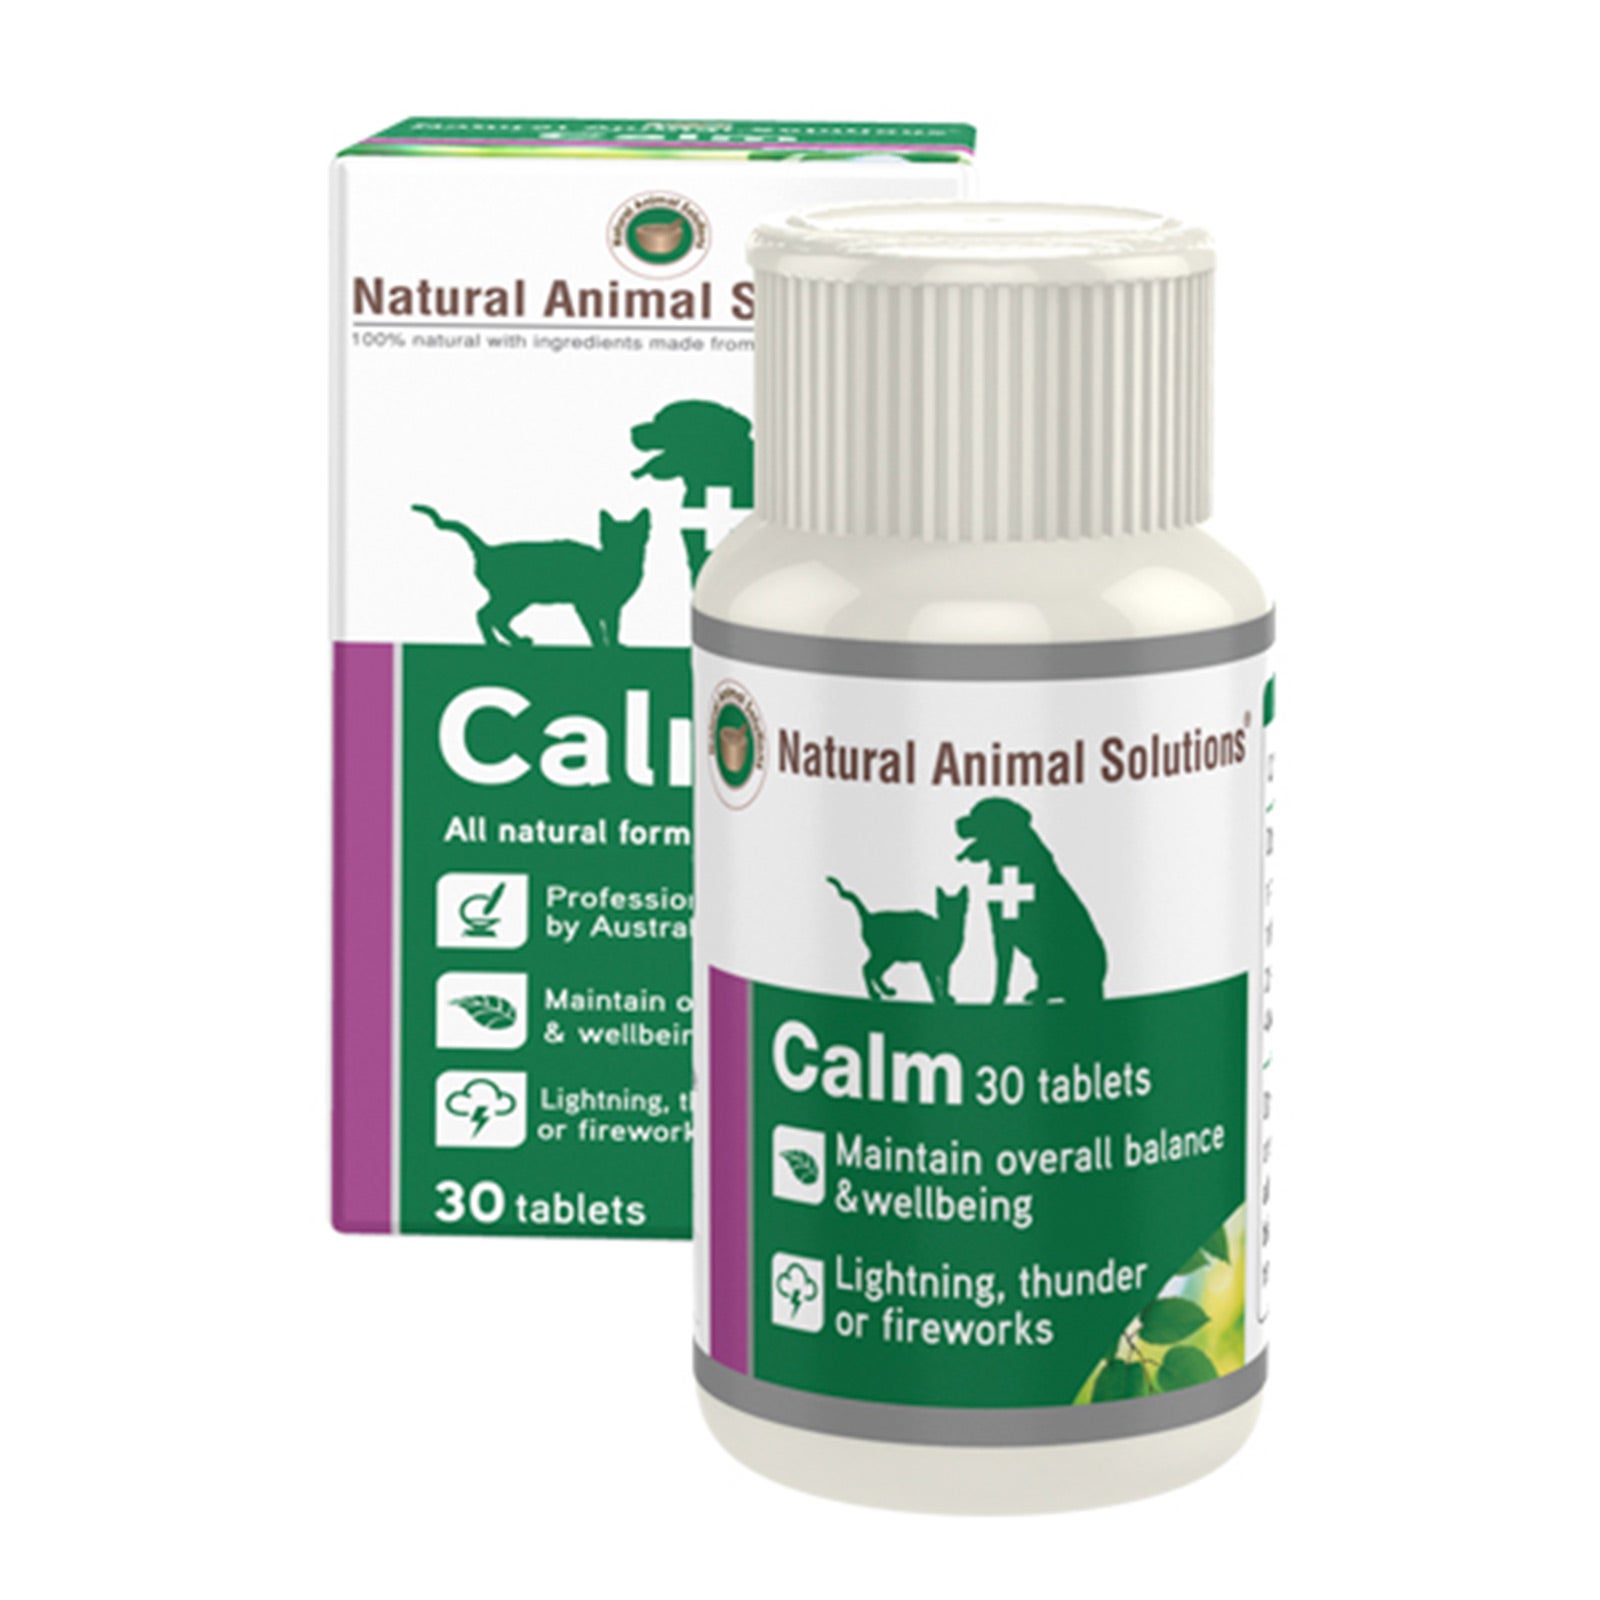 NAS Calm for Dogs & Cats 30 Tablets - Natural Animal Solutions Anxiety Tabs Pets